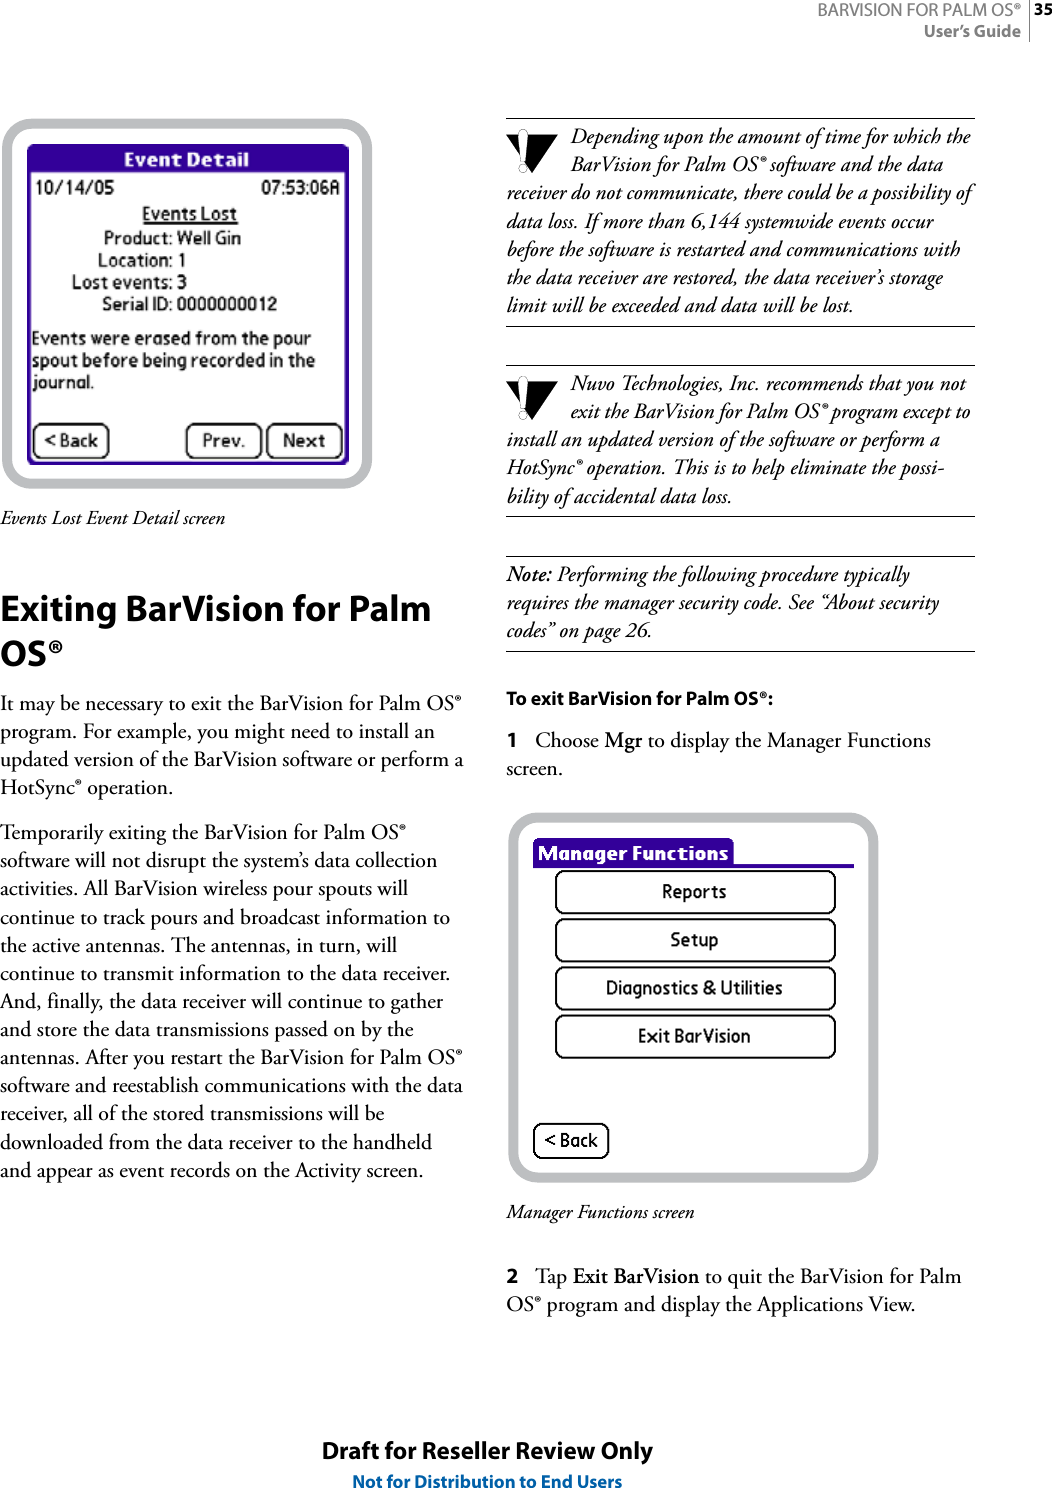 35BARVISION FOR PALM OS®User’s GuideDraft for Reseller Review OnlyNot for Distribution to End UsersEvents Lost Event Detail screenExiting BarVision for Palm OS®It may be necessary to exit the BarVision for Palm OS® program. For example, you might need to install an updated version of the BarVision software or perform a HotSync® operation.Temporarily exiting the BarVision for Palm OS® software will not disrupt the system’s data collection activities. All BarVision wireless pour spouts will continue to track pours and broadcast information to the active antennas. The antennas, in turn, will continue to transmit information to the data receiver. And, finally, the data receiver will continue to gather and store the data transmissions passed on by the antennas. After you restart the BarVision for Palm OS® software and reestablish communications with the data receiver, all of the stored transmissions will be downloaded from the data receiver to the handheld and appear as event records on the Activity screen.Depending upon the amount of time for which the BarVision for Palm OS® software and the data receiver do not communicate, there could be a possibility of data loss. If more than 6,144 systemwide events occur before the software is restarted and communications with the data receiver are restored, the data receiver’s storage limit will be exceeded and data will be lost.Nuvo Technologies, Inc. recommends that you not exit the BarVision for Palm OS® program except to install an updated version of the software or perform a HotSync® operation. This is to help eliminate the possi-bility of accidental data loss.Note: Performing the following procedure typically requires the manager security code. See “About security codes” on page 26.To exit BarVision for Palm OS®:1Choose Mgr to display the Manager Functions screen.Manager Functions screen2Tap  Exit BarVision to quit the BarVision for Palm OS® program and display the Applications View.